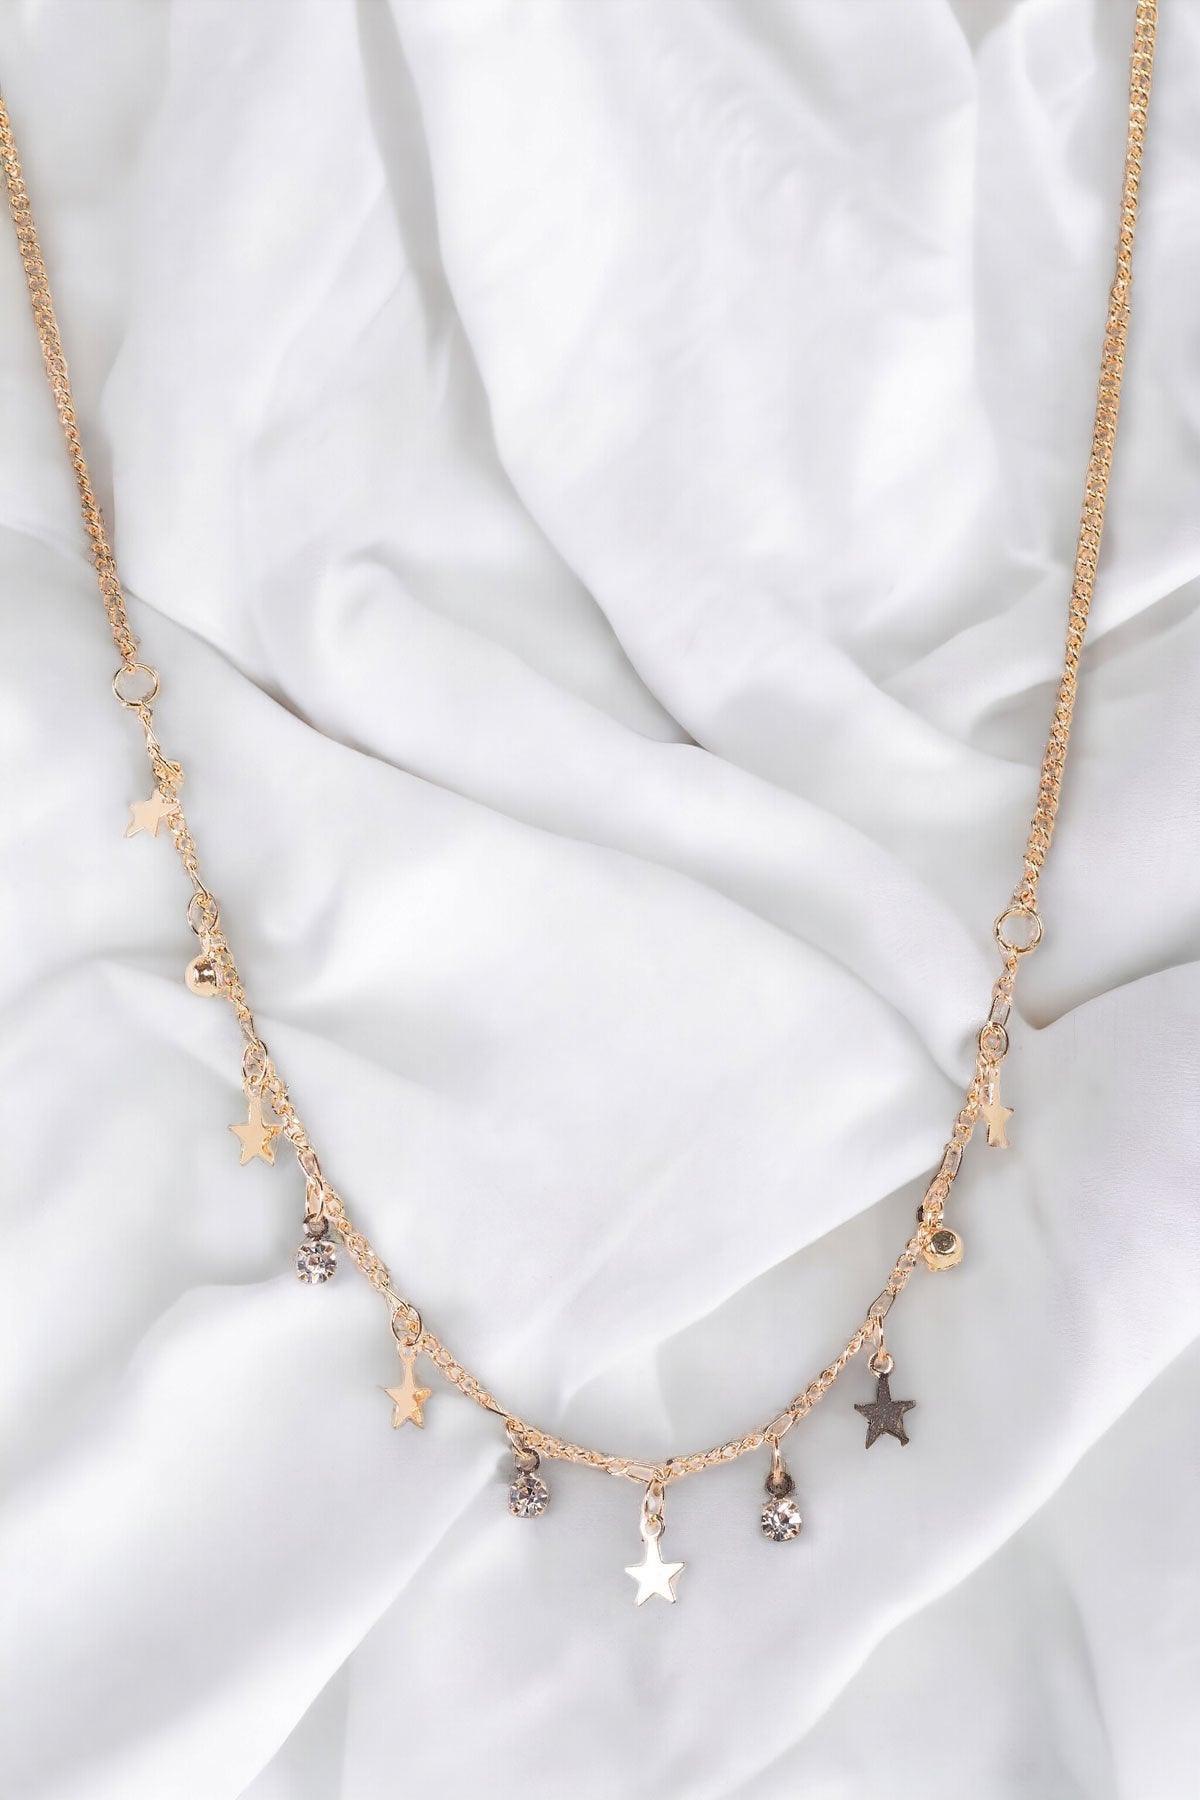 Jewelry- Gold Link Chain Star & Faux Diamond Charms Necklace